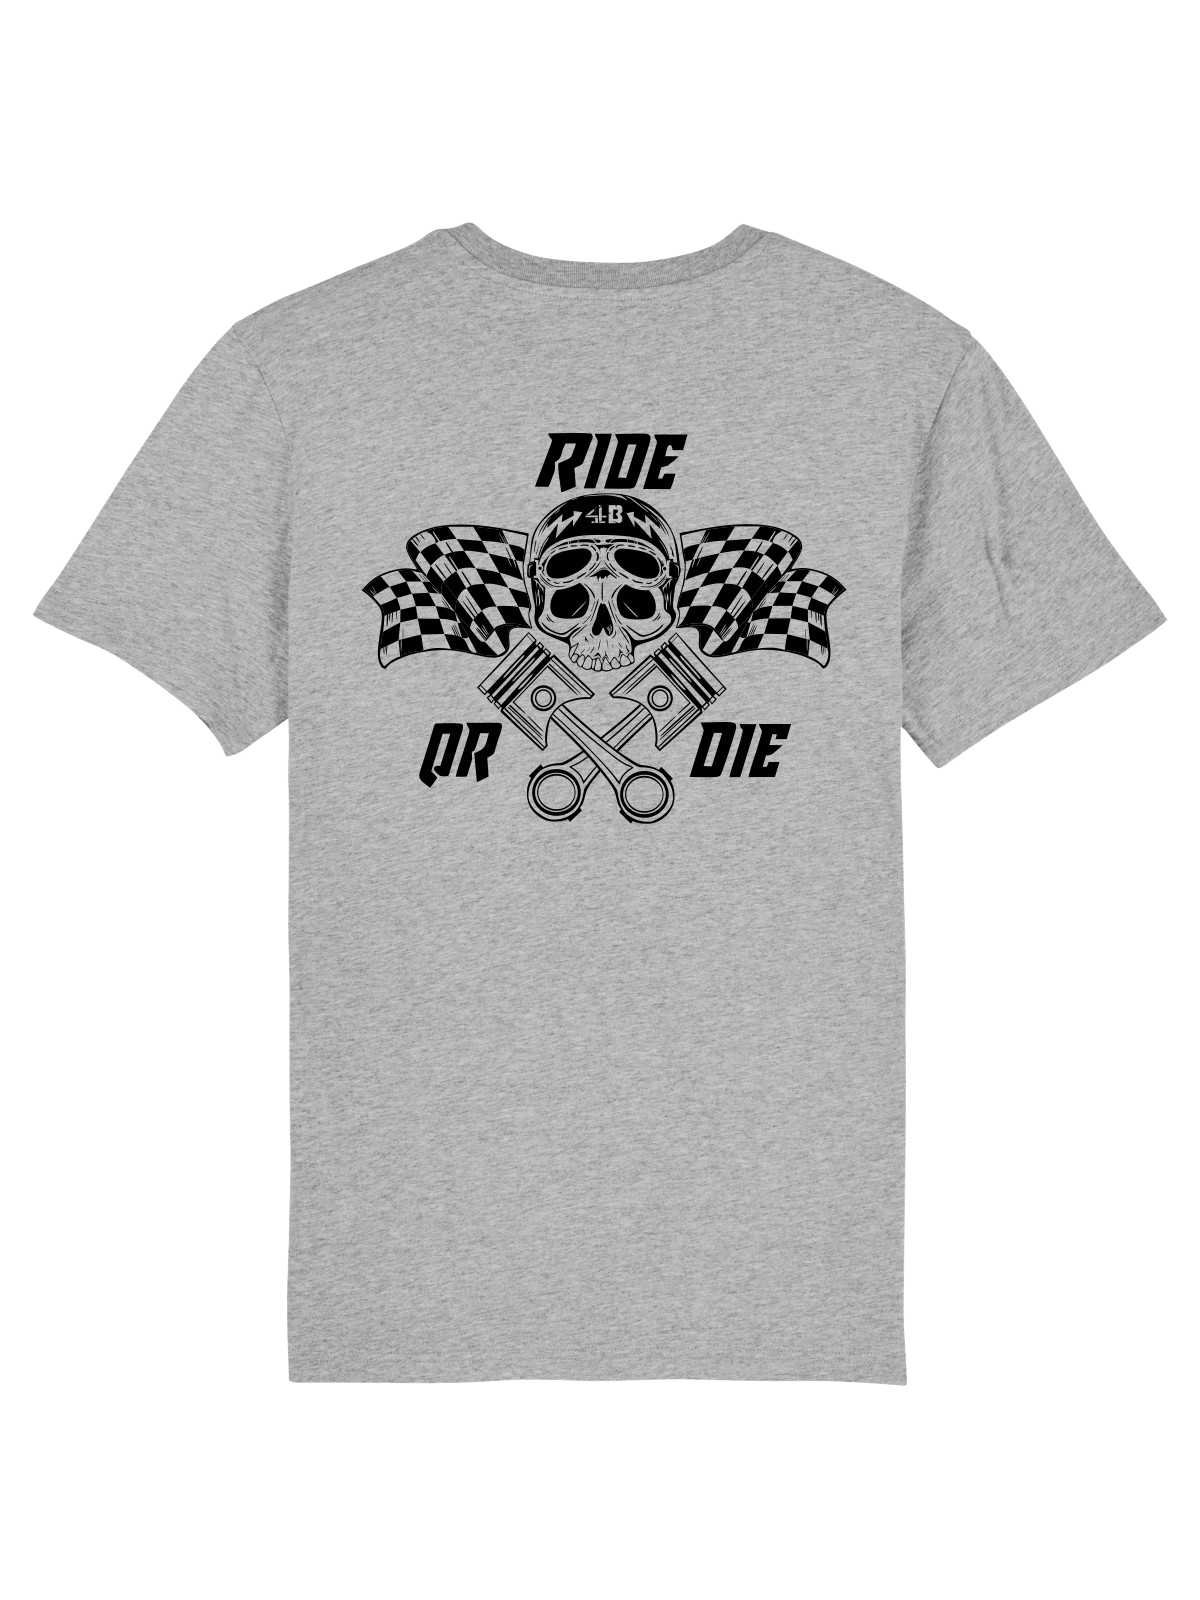 4Brothers T-Shirt ride or die  T-Shirt Road Grey 5XL